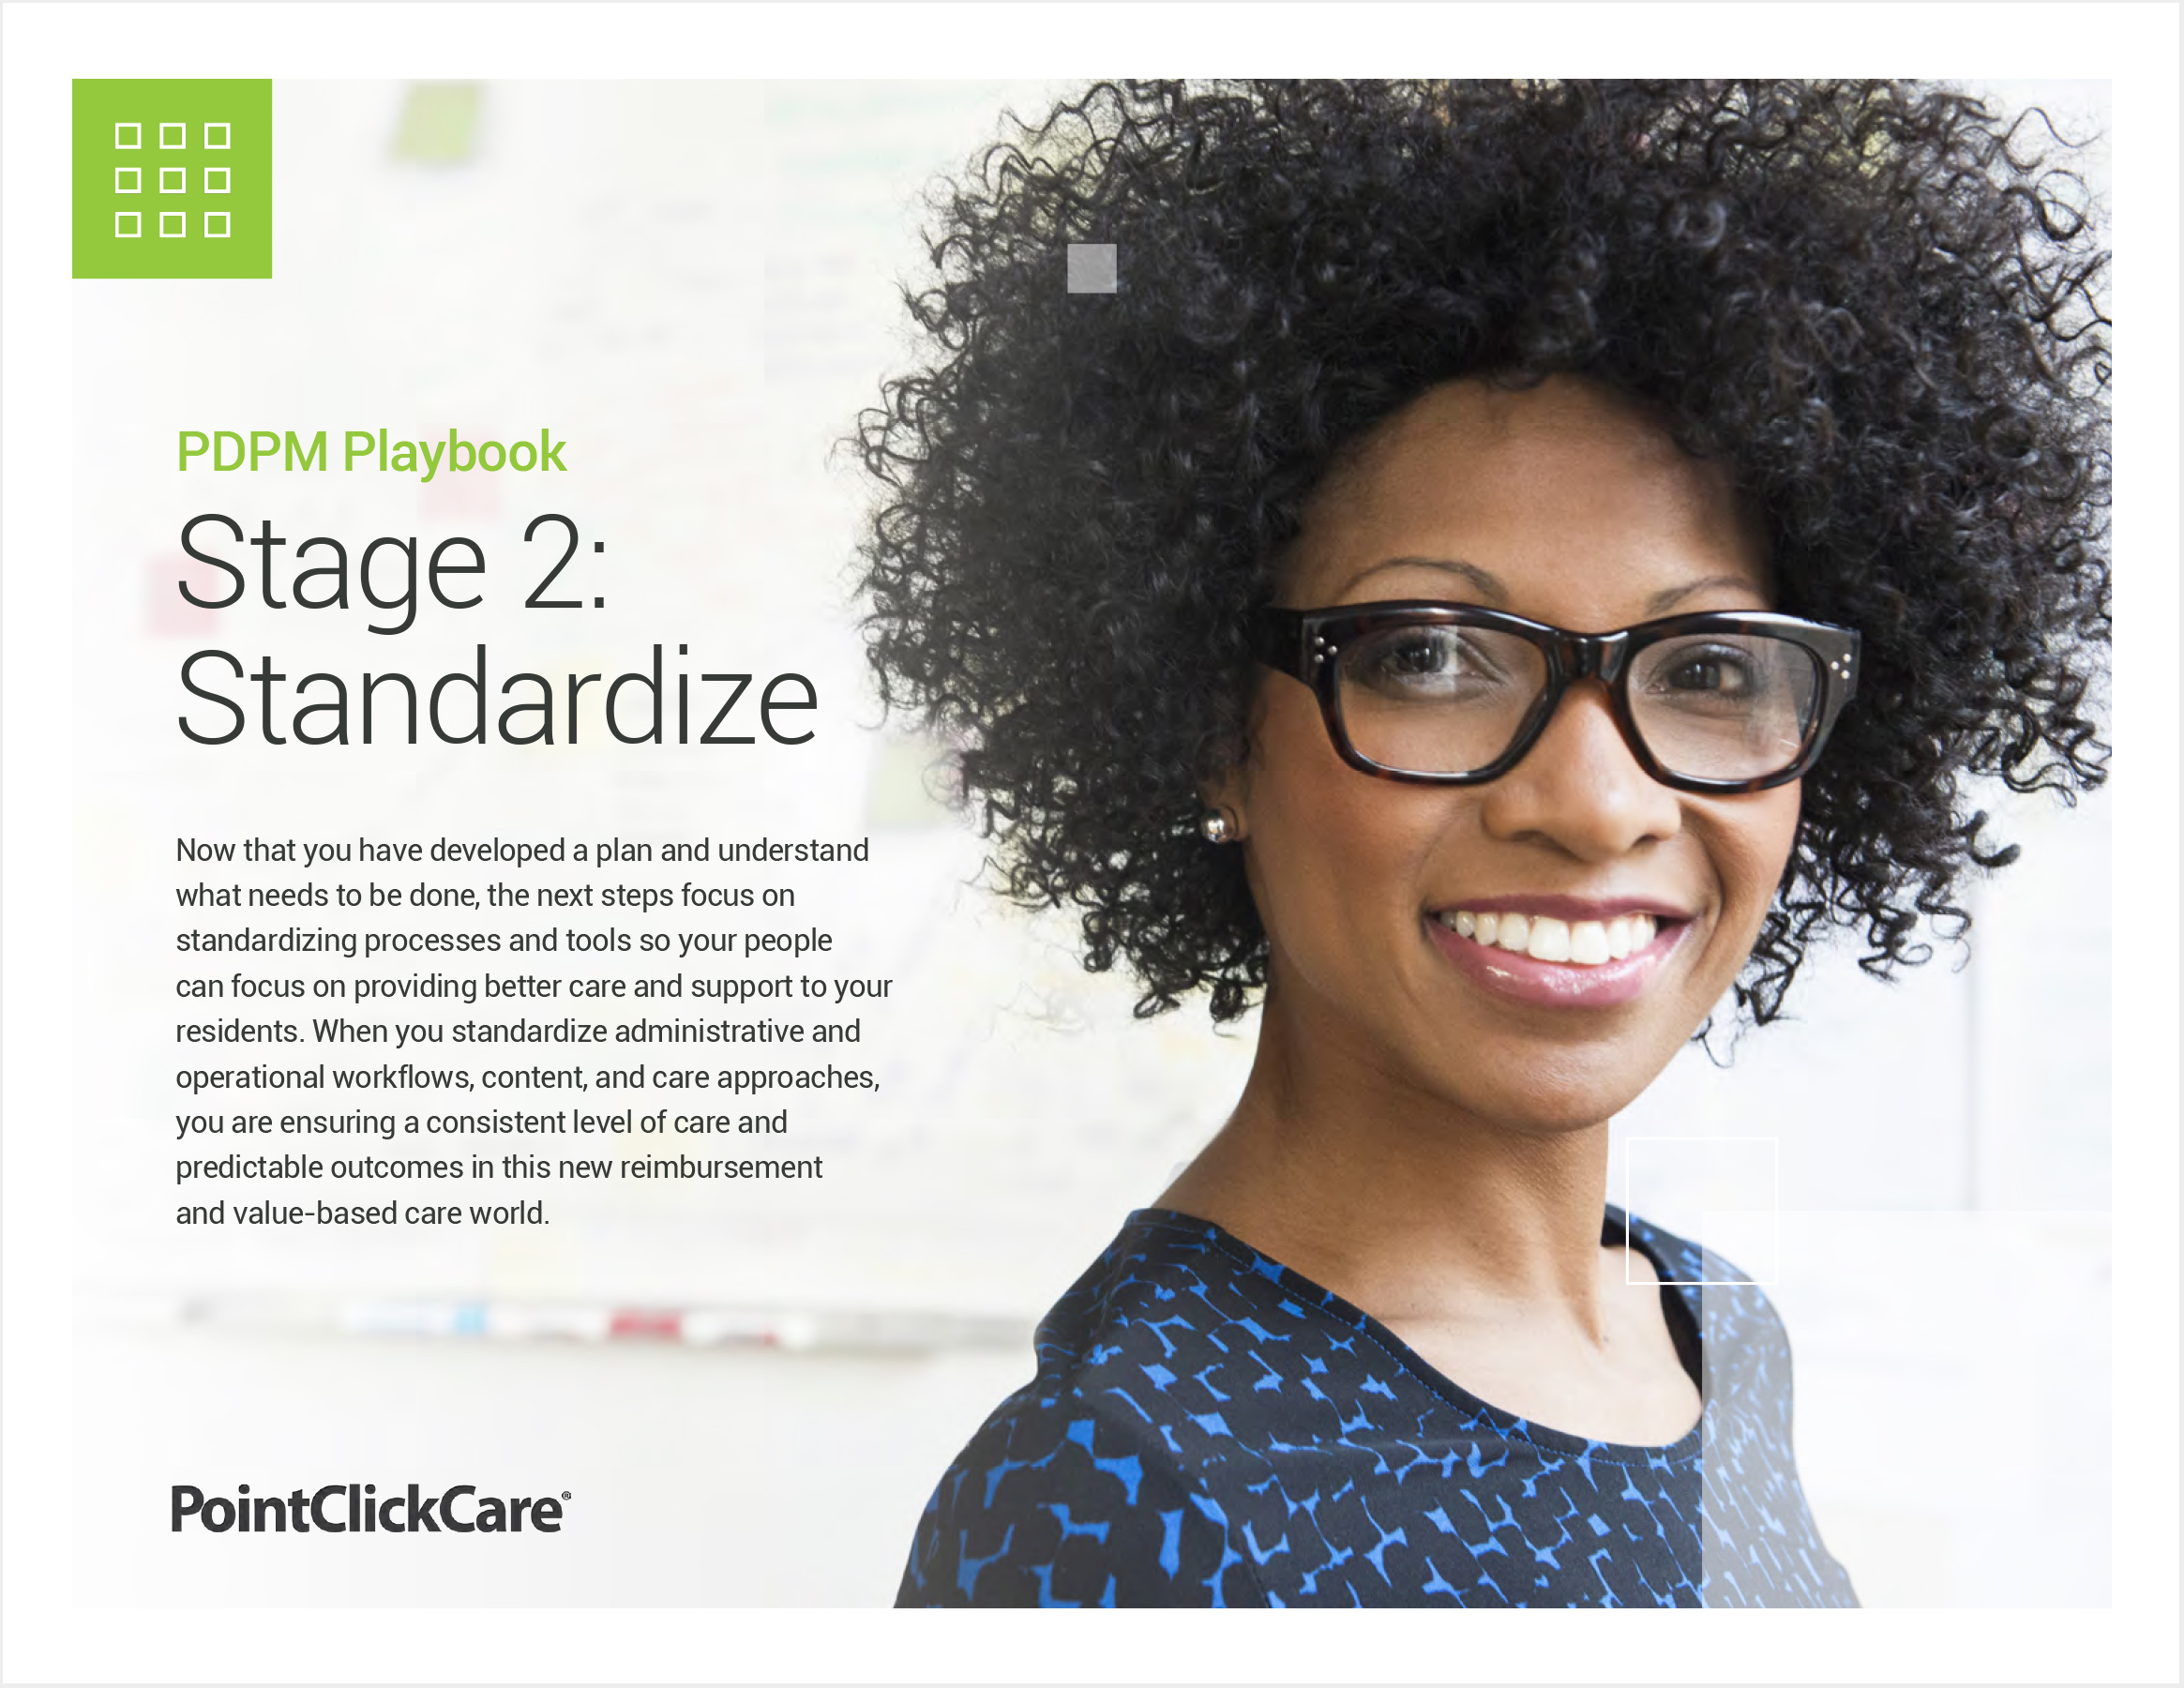 pdpm-playbook-stage-2-standardize-cover-pg